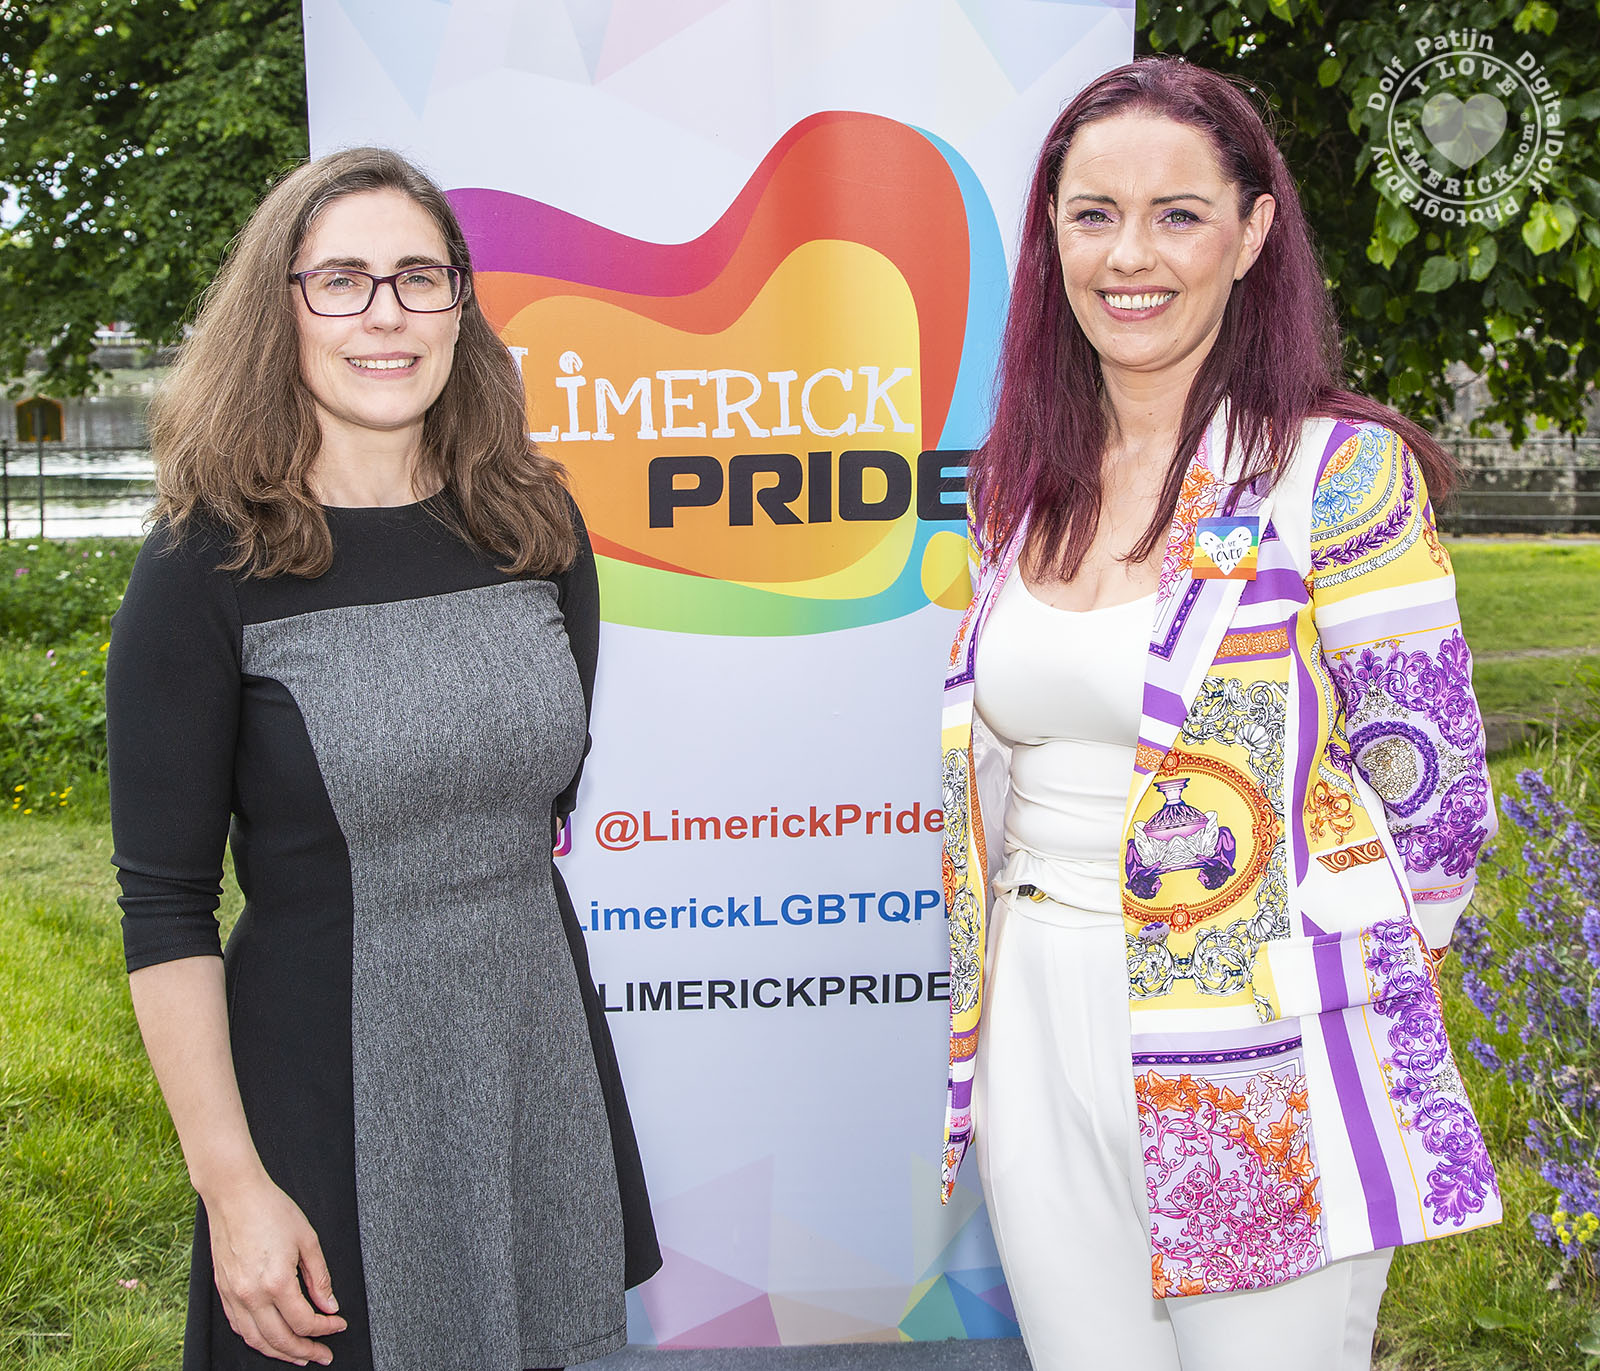 Limerick Pride reception - Slater will give an enthralling talk on Kilfinnane actress Alice O'Day, who graced the international stage and screen in the 1920s and 30s. Pictured above with Lisa daly, Chairperson of Limerick Pride. Picture: Dolf Patijn/ilovelimerick